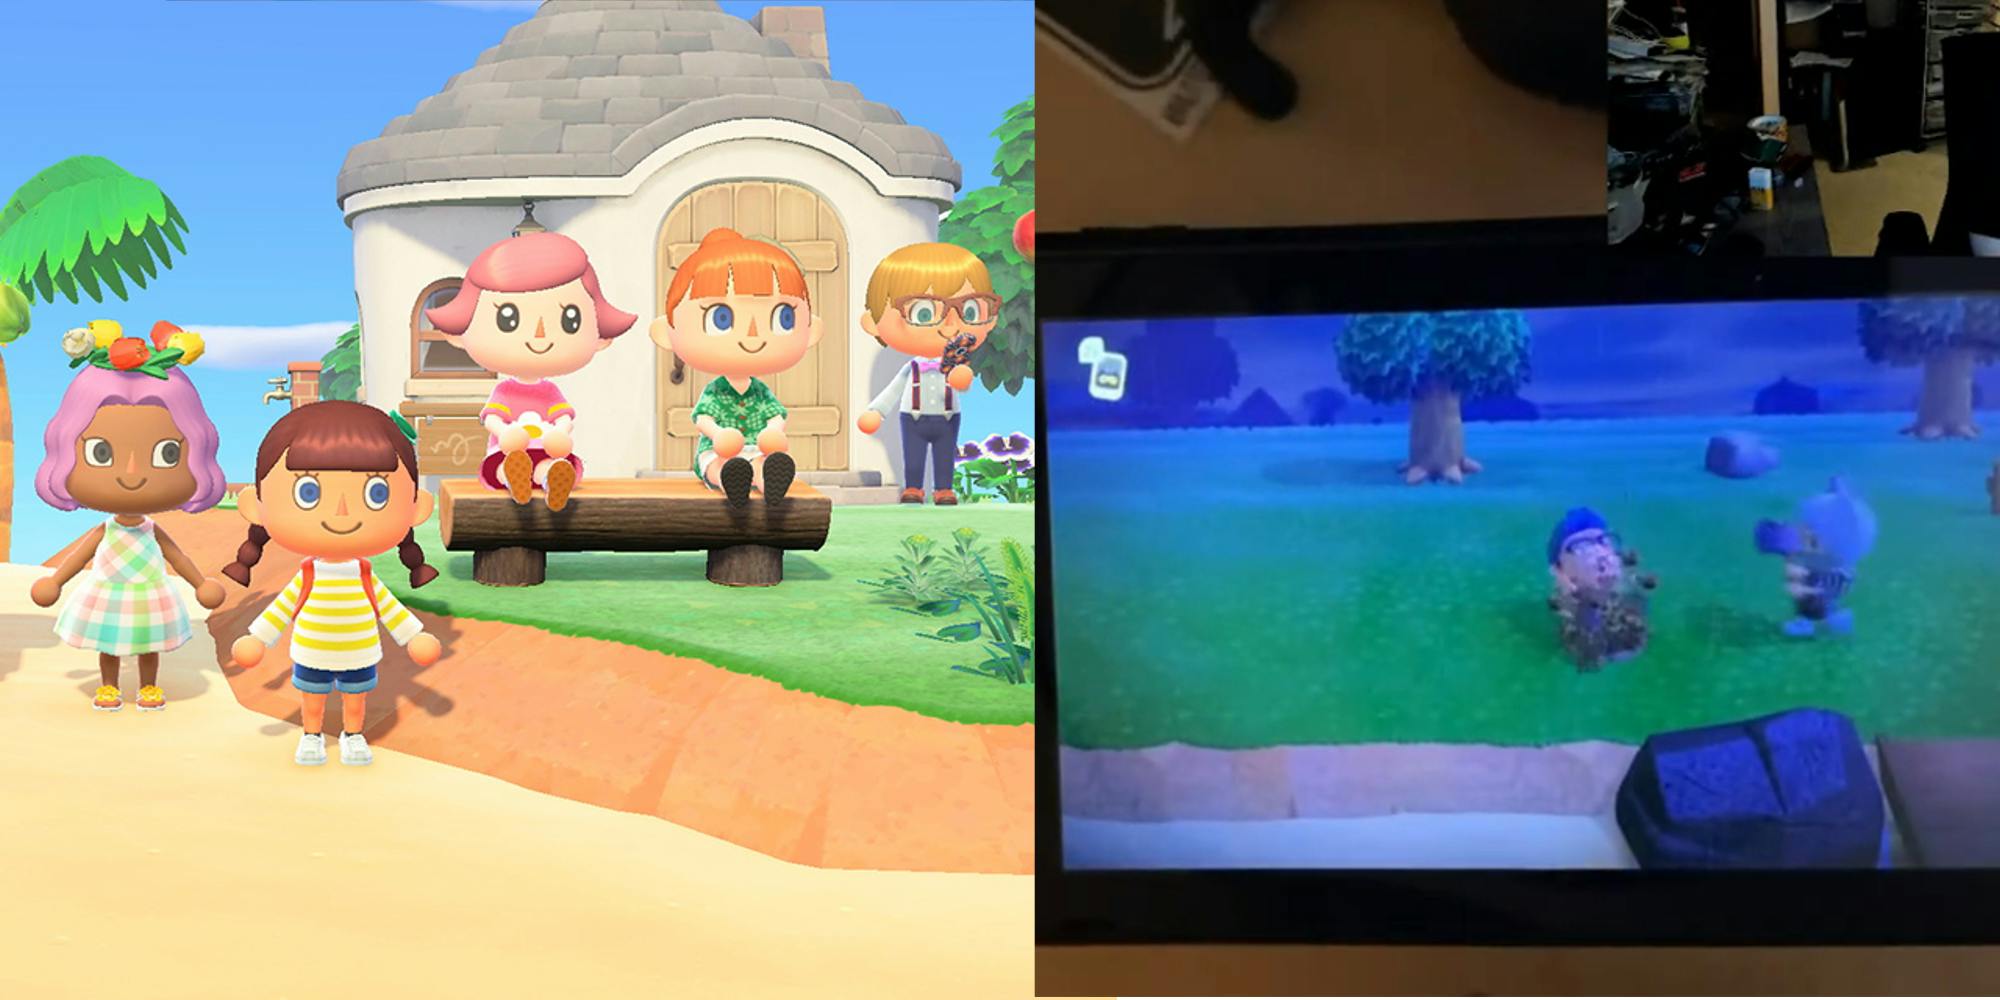 Sex Toys Now Work With Animal Crossing: New Horizons